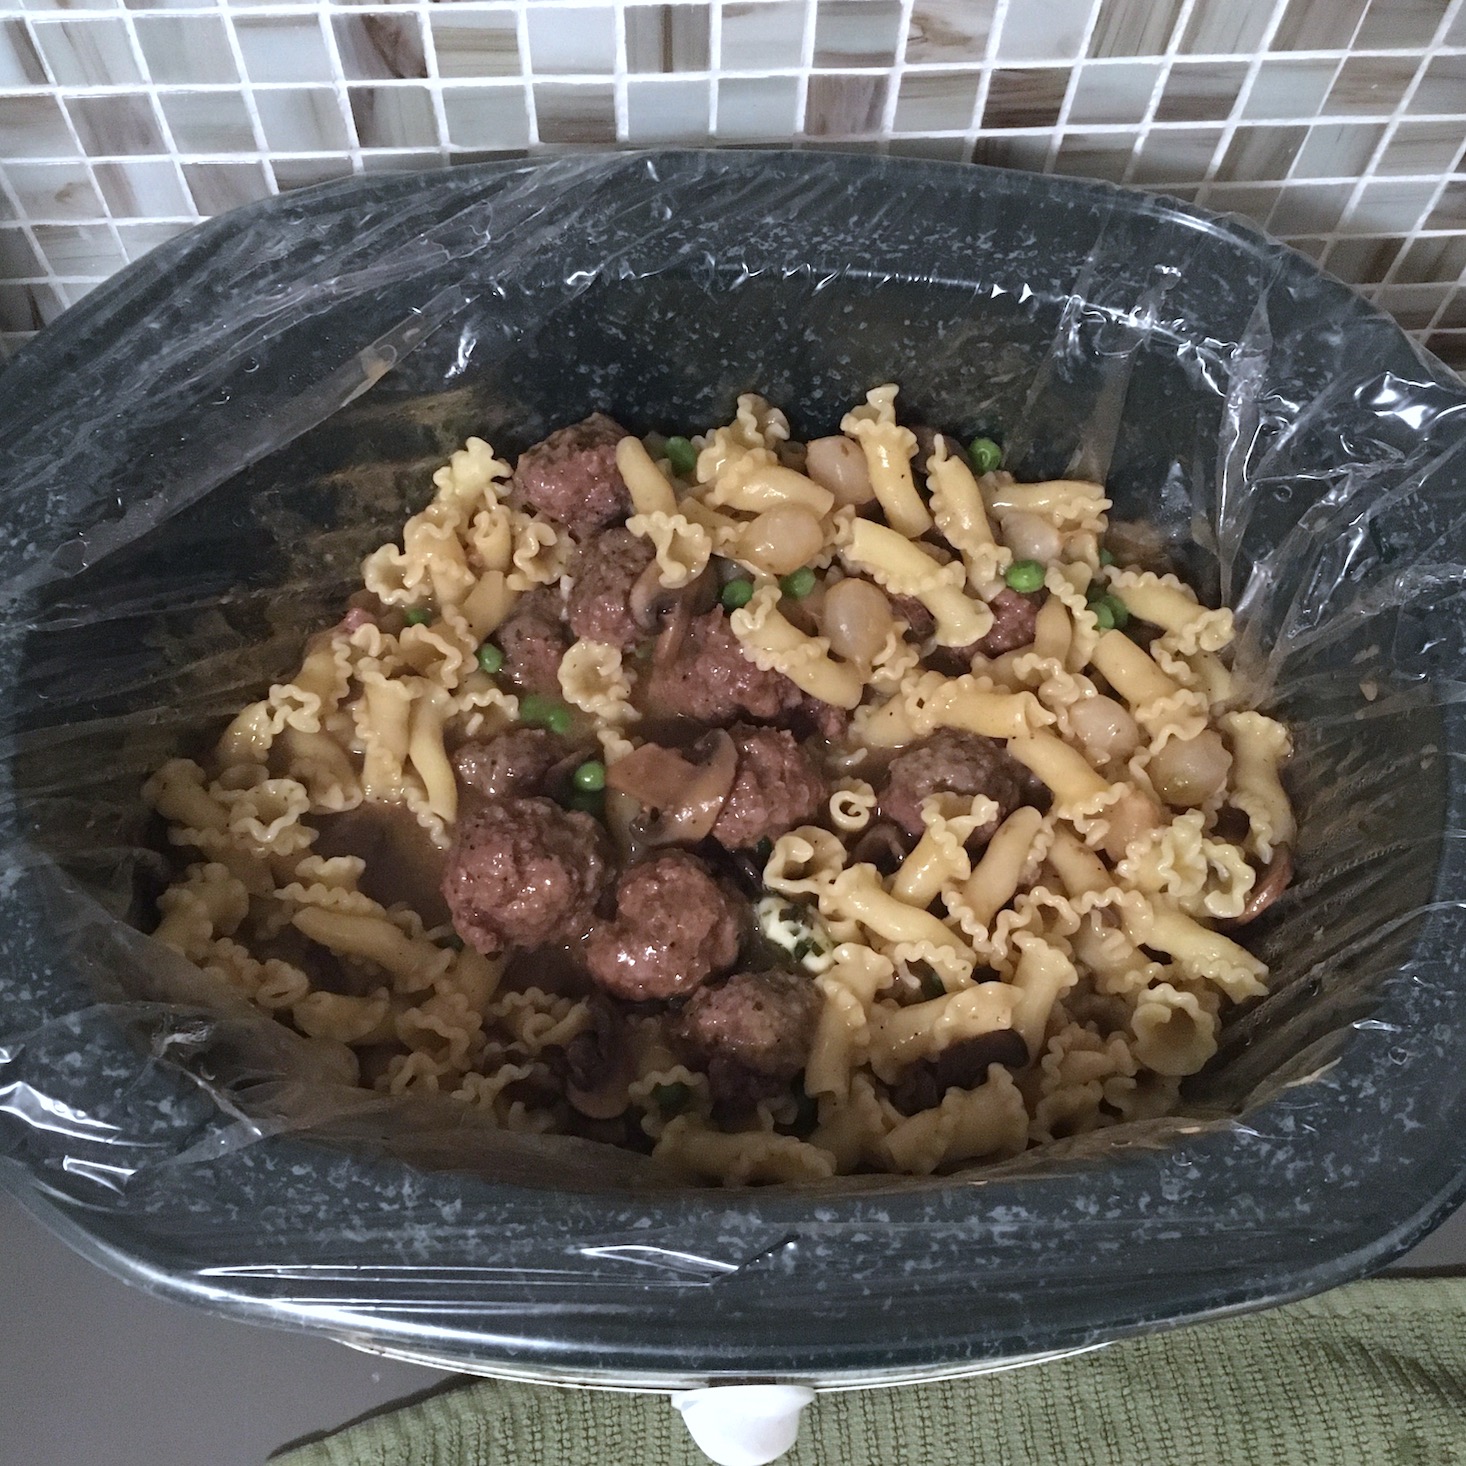 Home Chef February 2020 - slow cooker meatballs marsala pasta added to crockpot